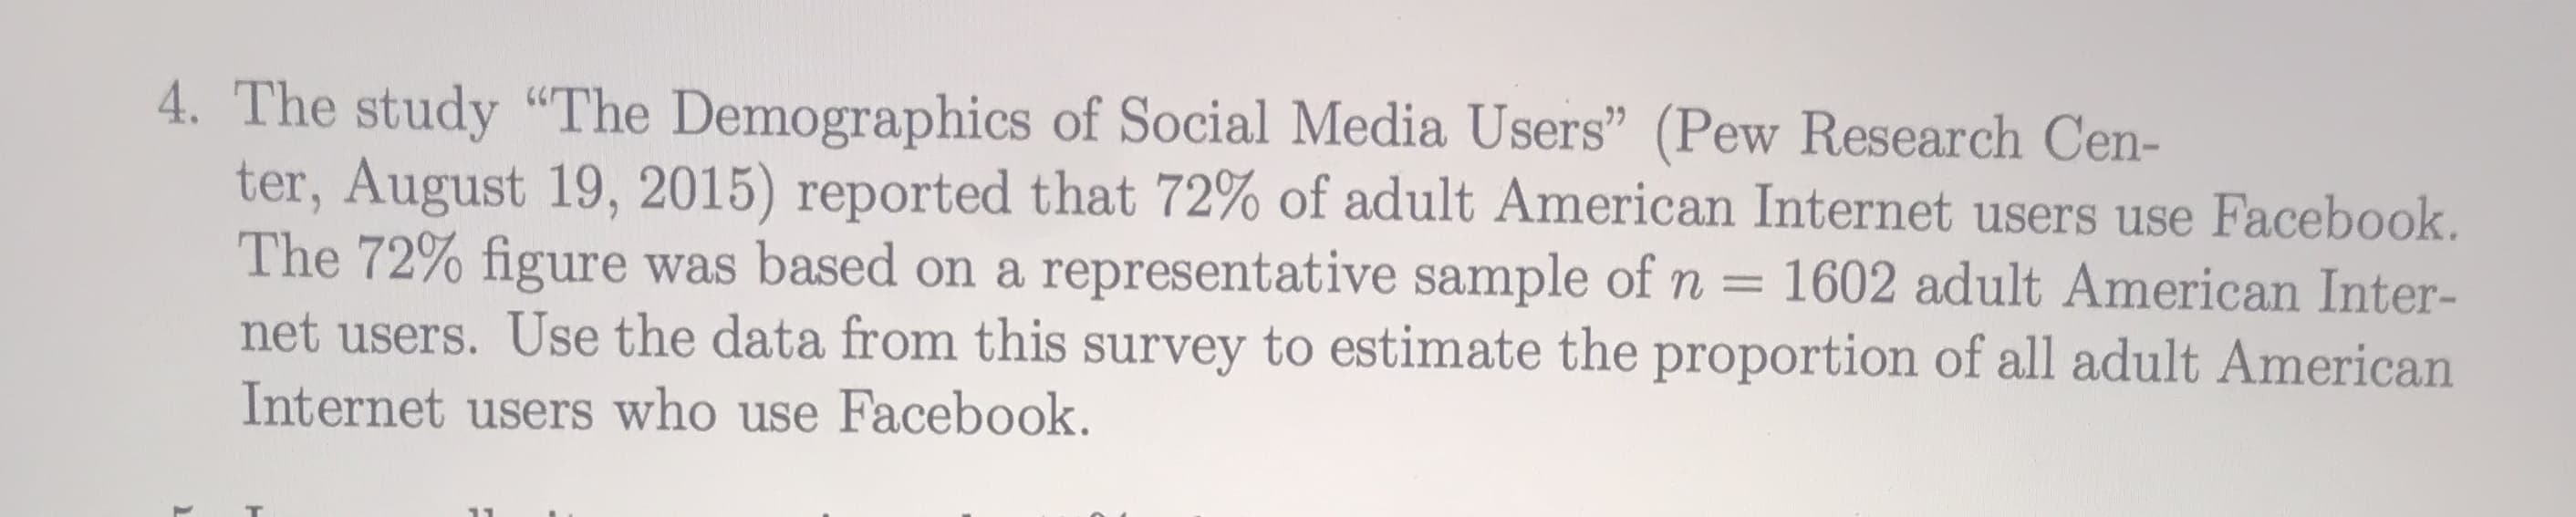 4. The study "The Demographics of Social Media Users" (Pew Research Cen-
ter, August 19, 2015) reported that 72% of adult American Internet users use Facebook.
The 72% figure was based on a representative sample of n =
net users. Use the data from this survey to estimate the proportion of all adult American
Internet users who use Facebook.
1602 adult American Inter-
